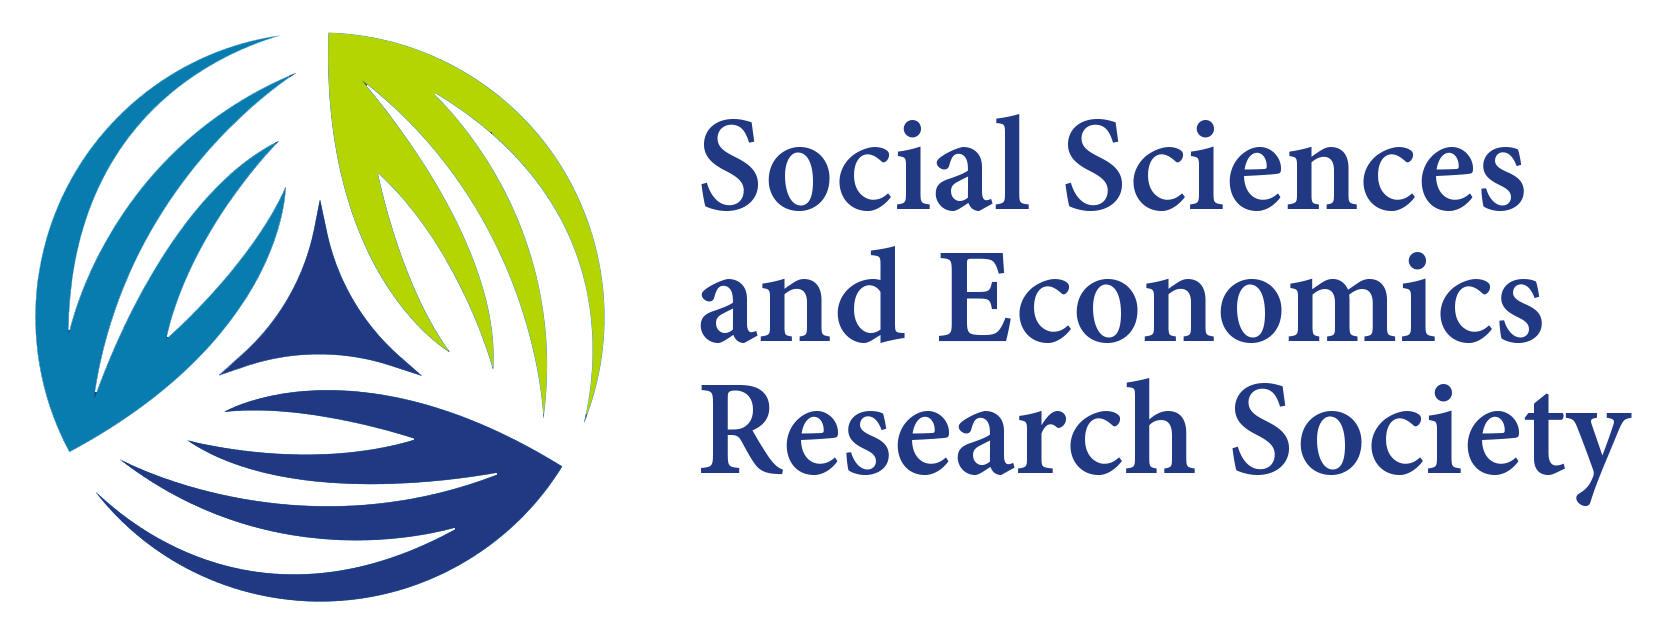 Amsterdam, Netherlands SSERS 3rd International Conference on  Research Approaches in Social Science, Management, Humanities, Economy and Business